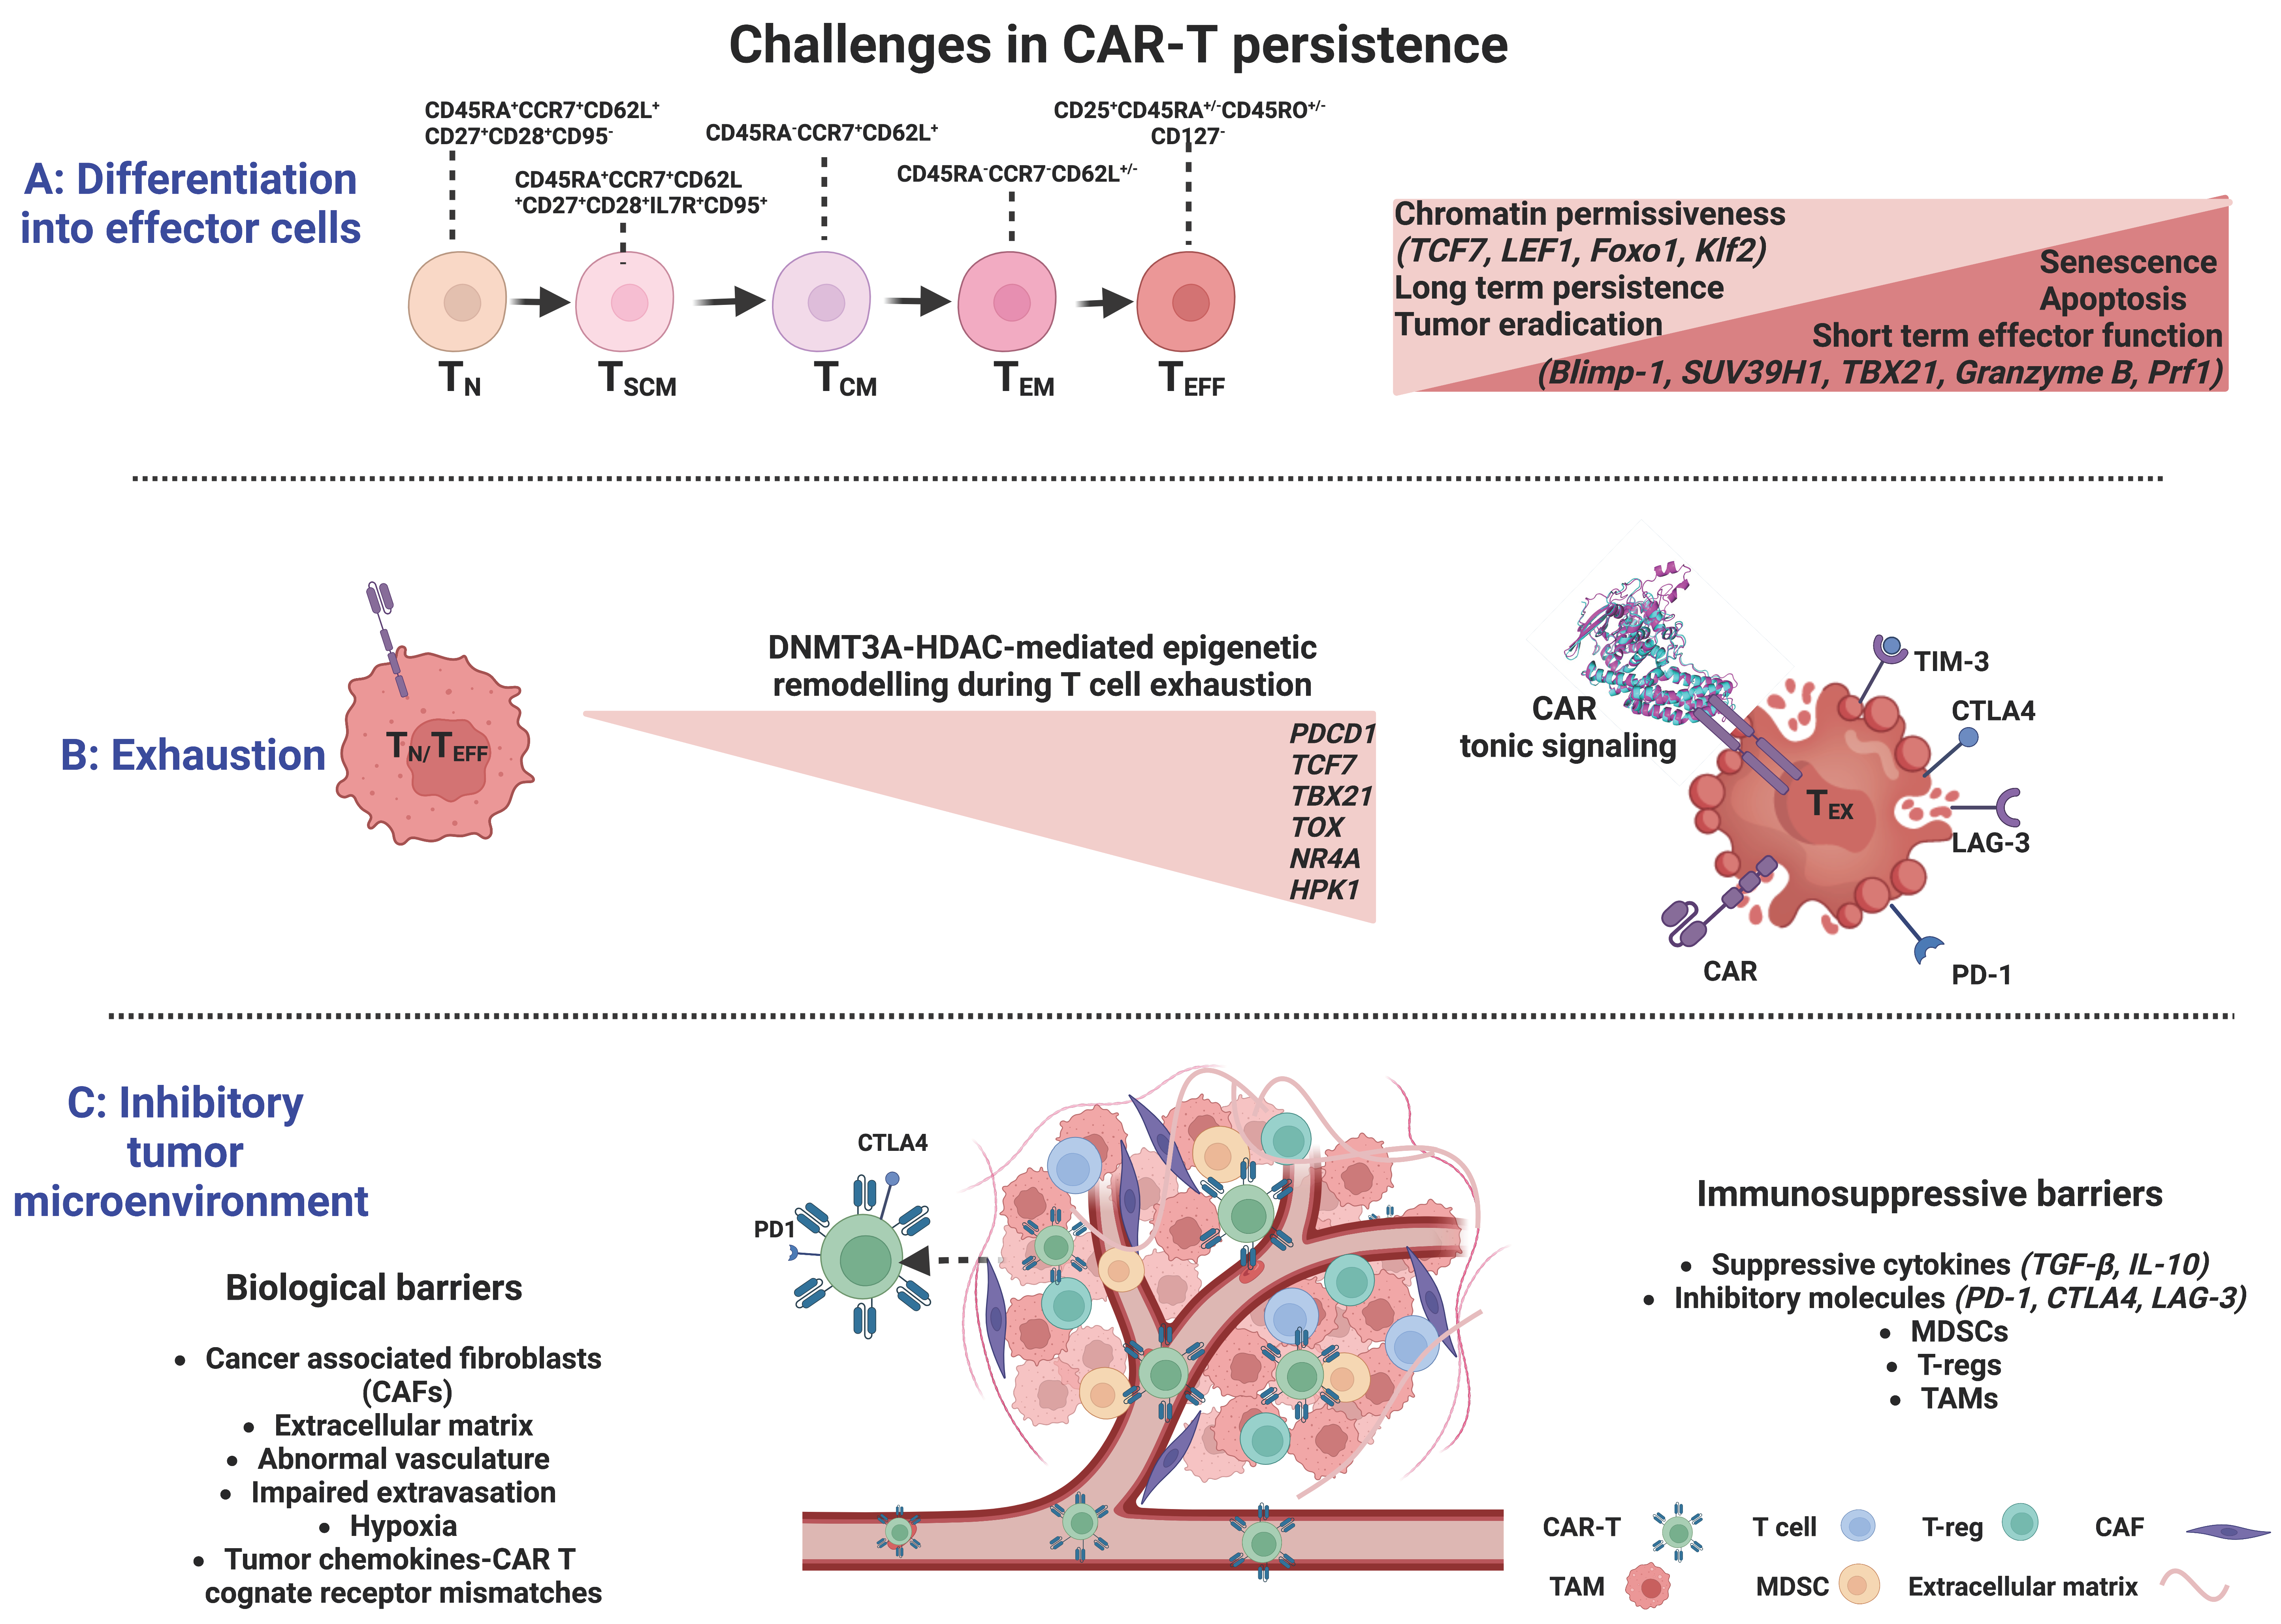 Transient rest restores functionality in exhausted CAR-T cells